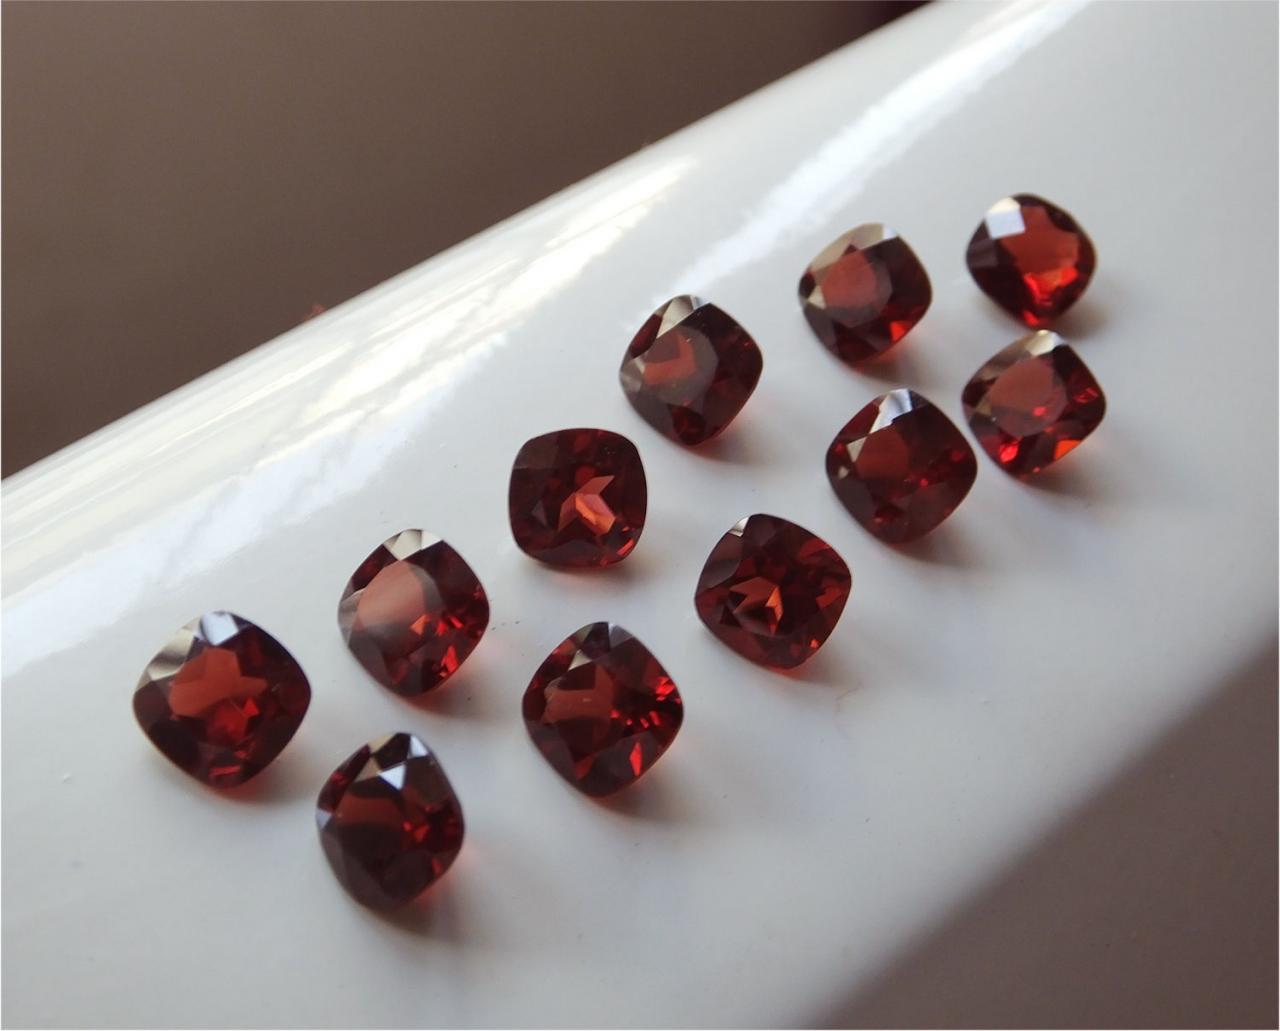 Garnet Natural Loose Gemstone Mixed Faceted Cut Red Stone Wholesale Lot DIY Gems